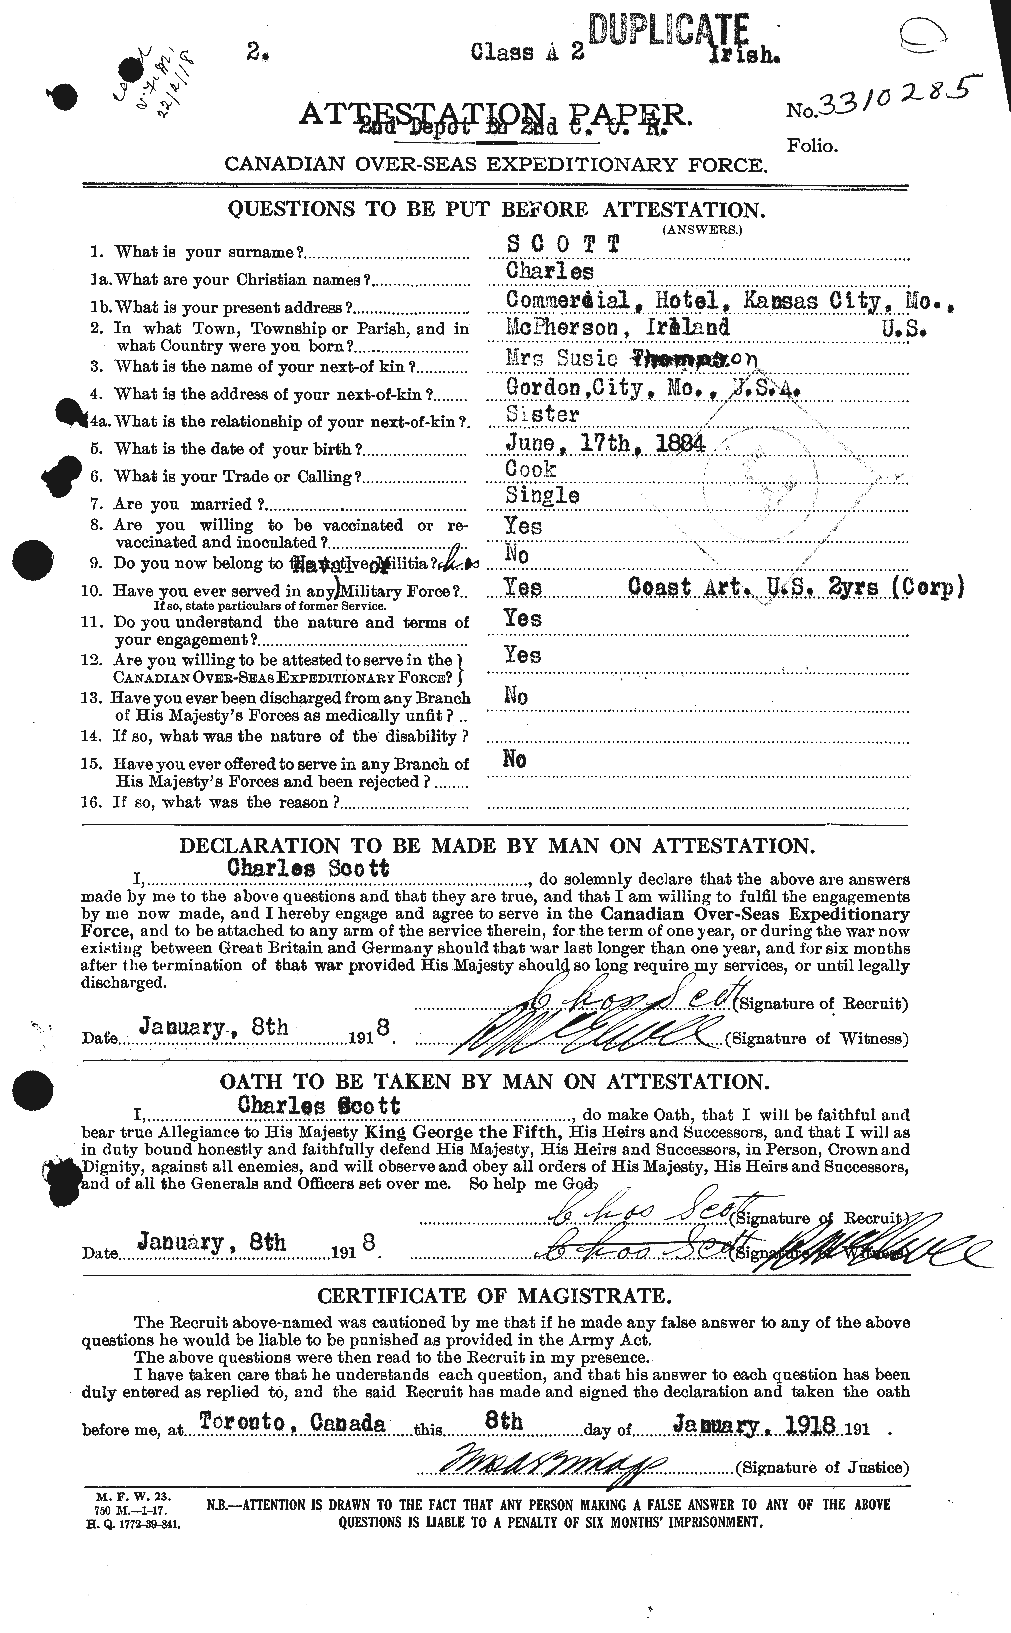 Personnel Records of the First World War - CEF 086184a